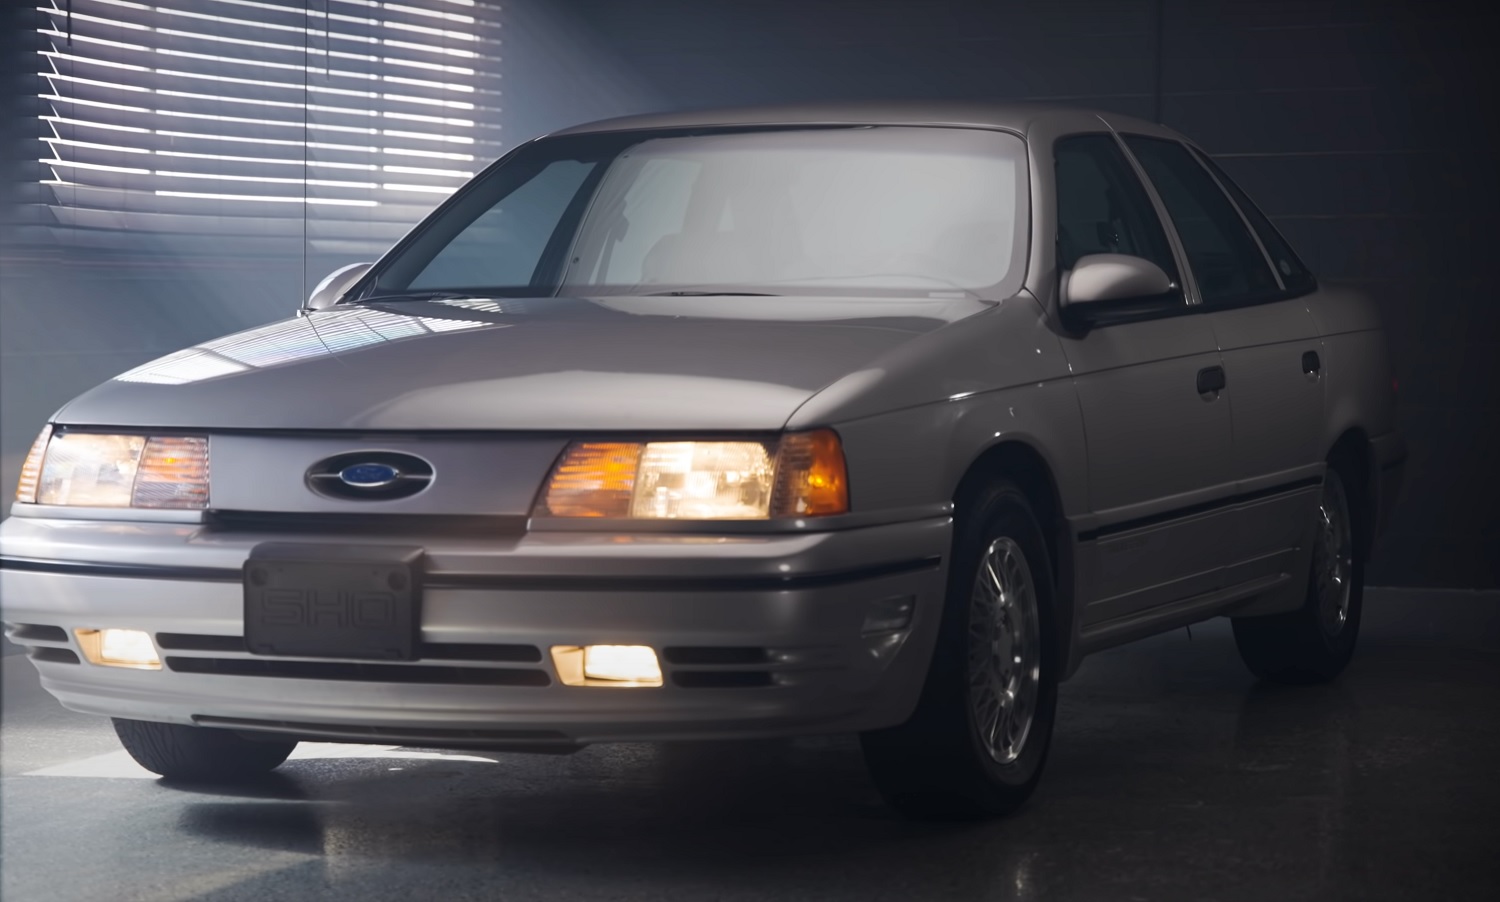 Beautiful 1995 Ford Taurus SHO Is Selling For A Hefty Price: Video